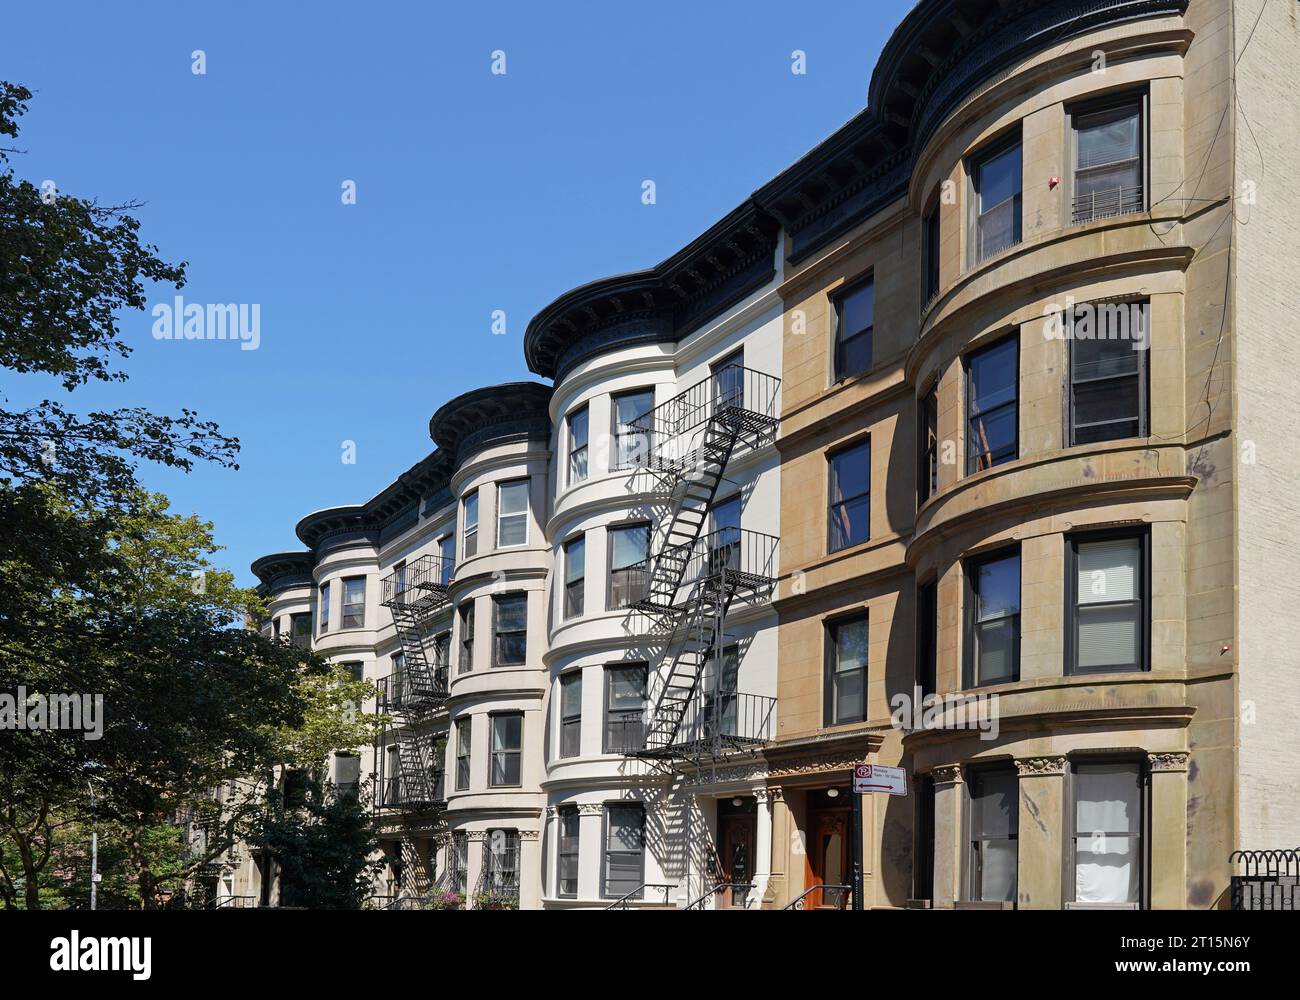 Street of old fashioned townhouses in New York City with curved fronts Stock Photo